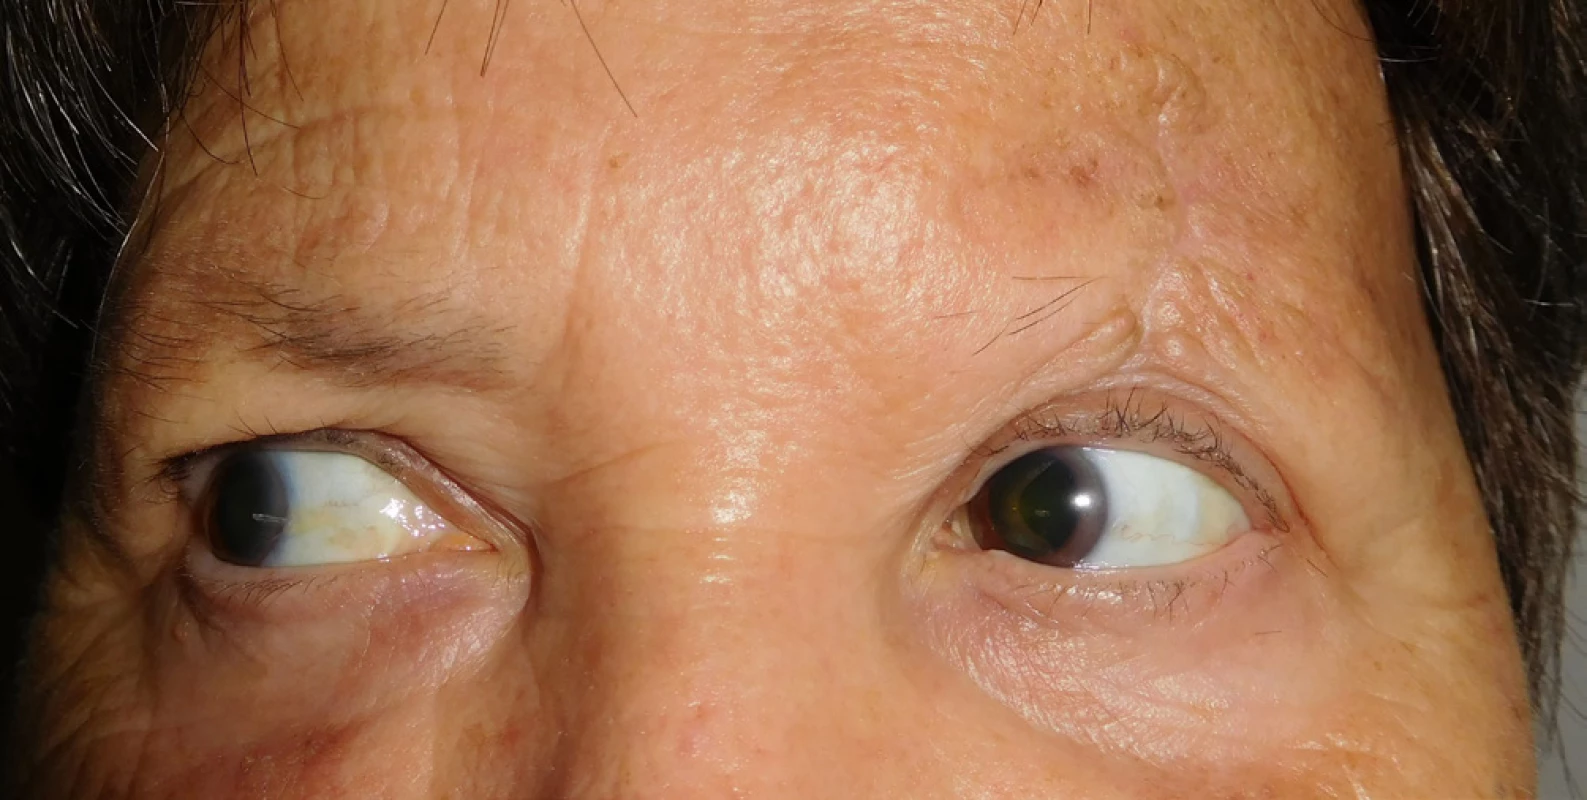 Patient 2 – detail of scar of upper eyelid with no recurrence
of MCC in September 2017